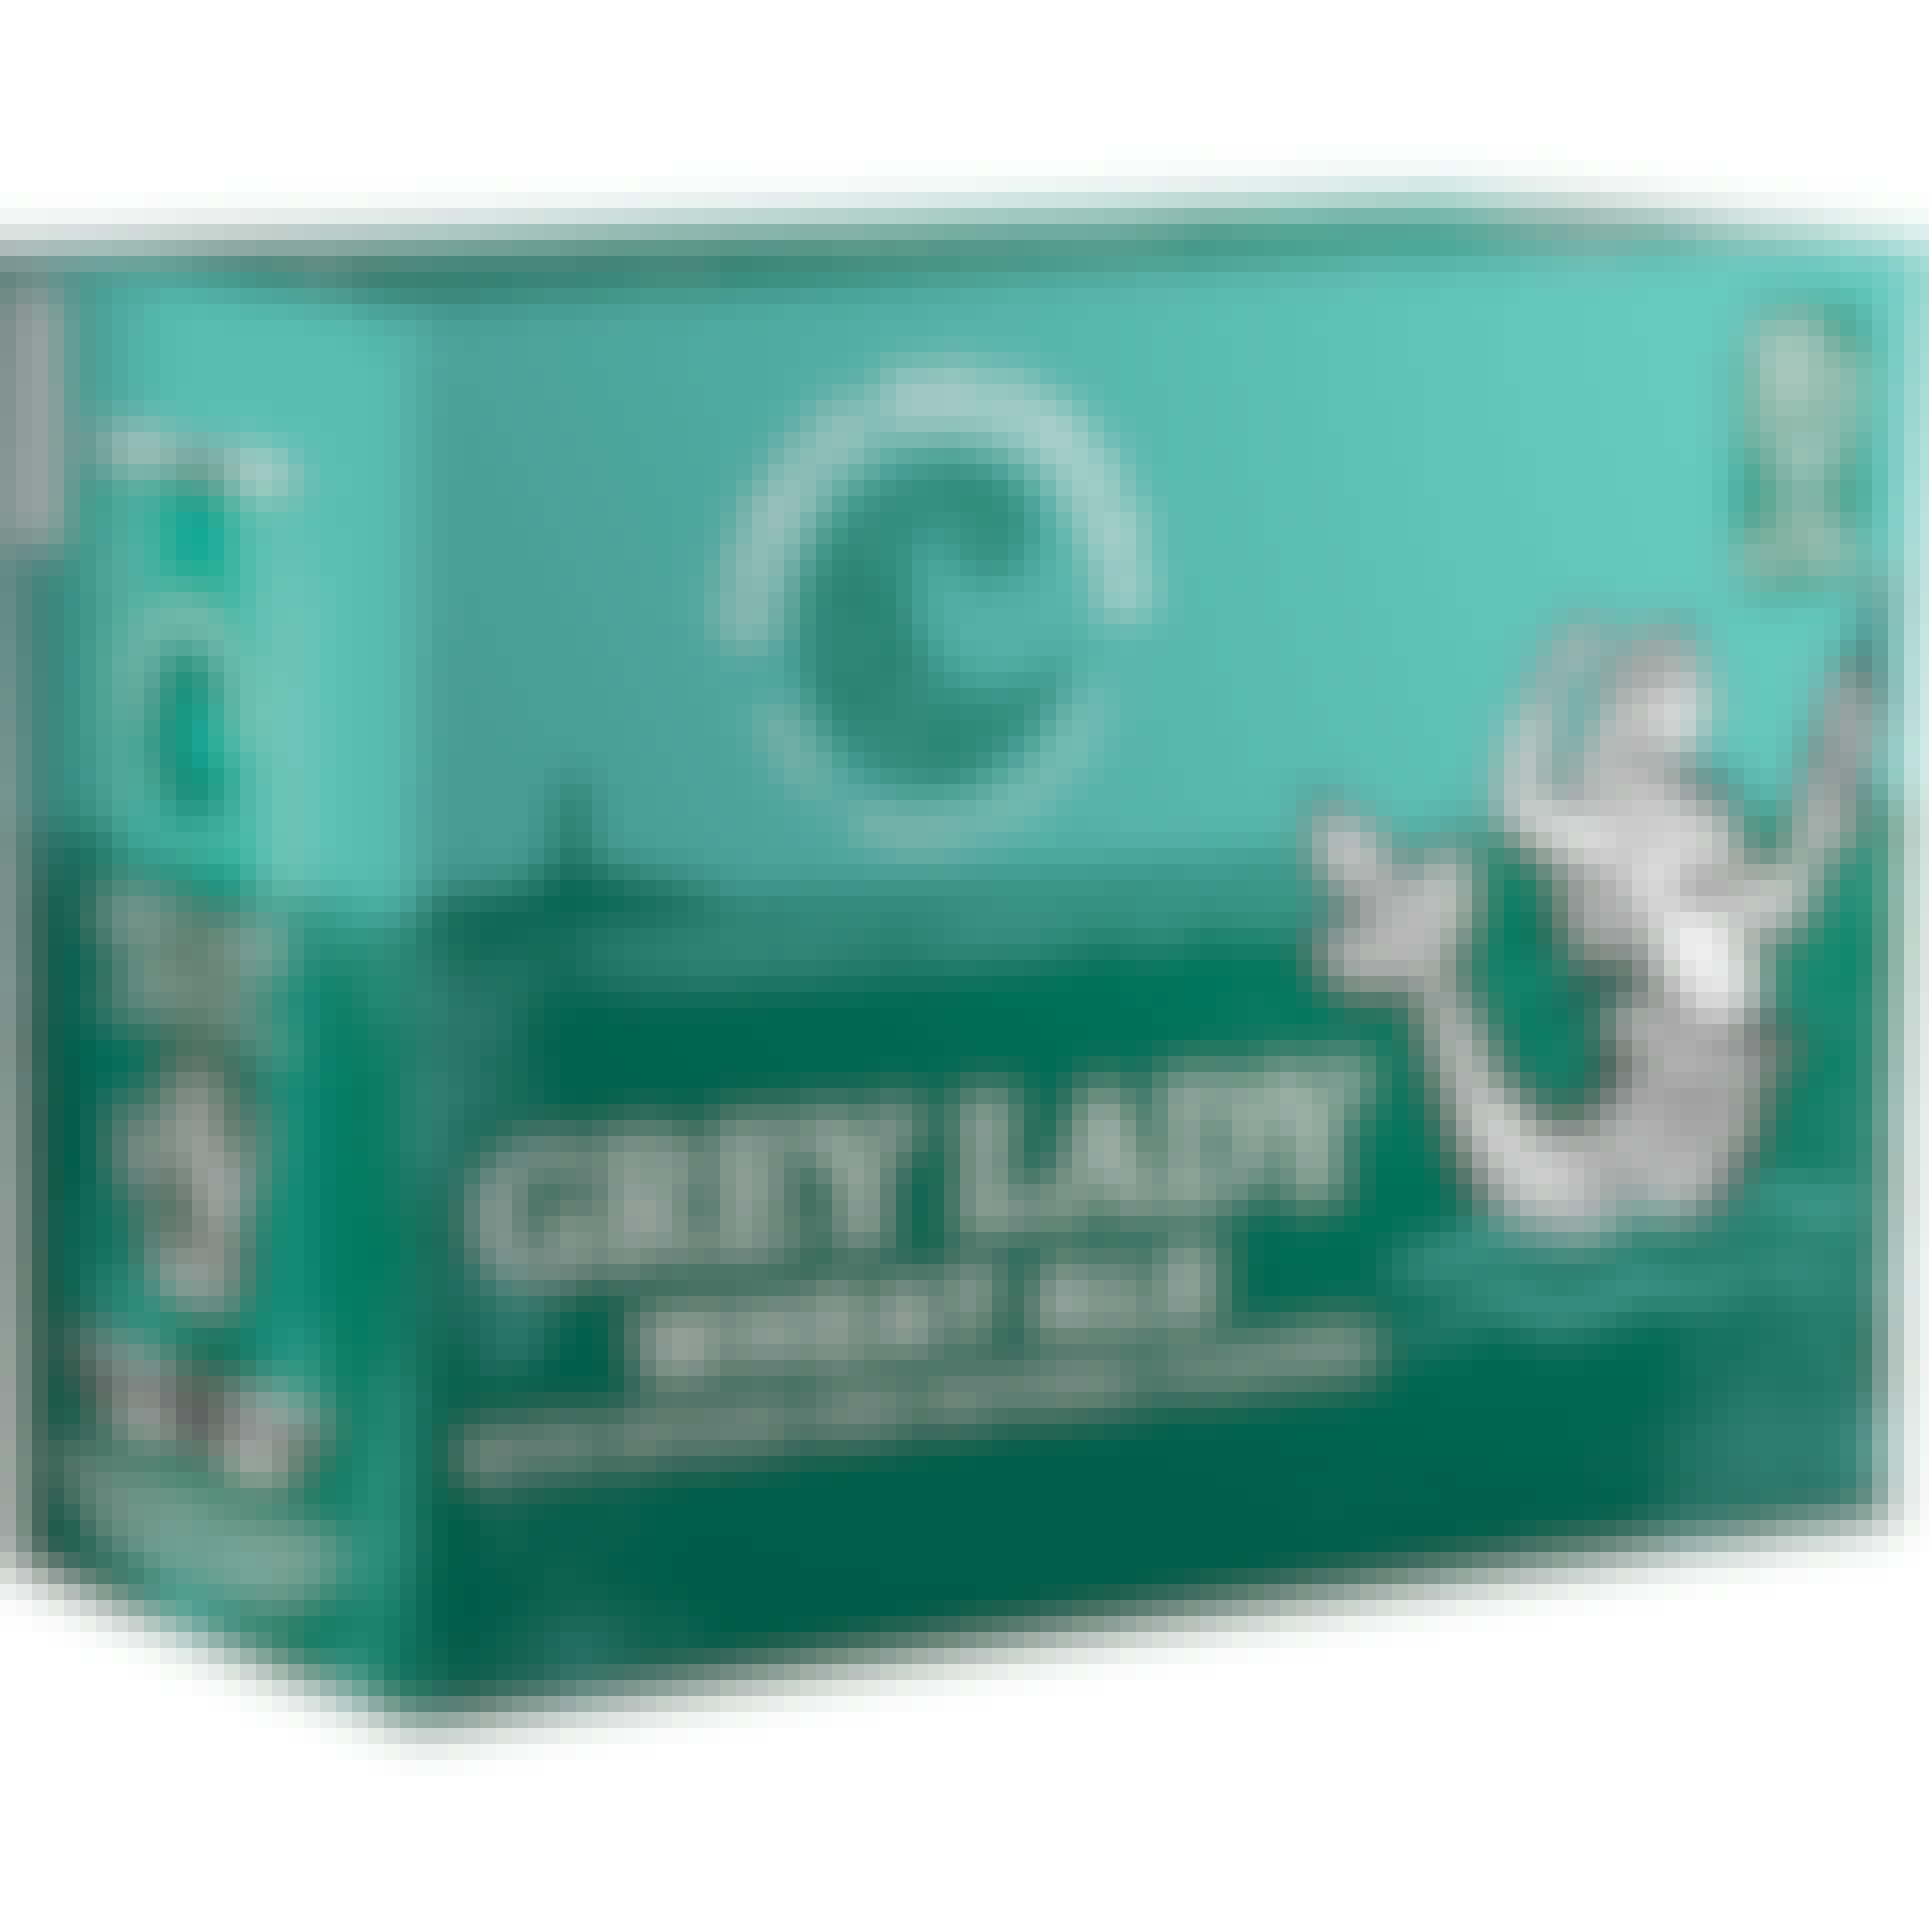 Cisco Brewers Grey Lady Ale 12 pack 12 oz. Can